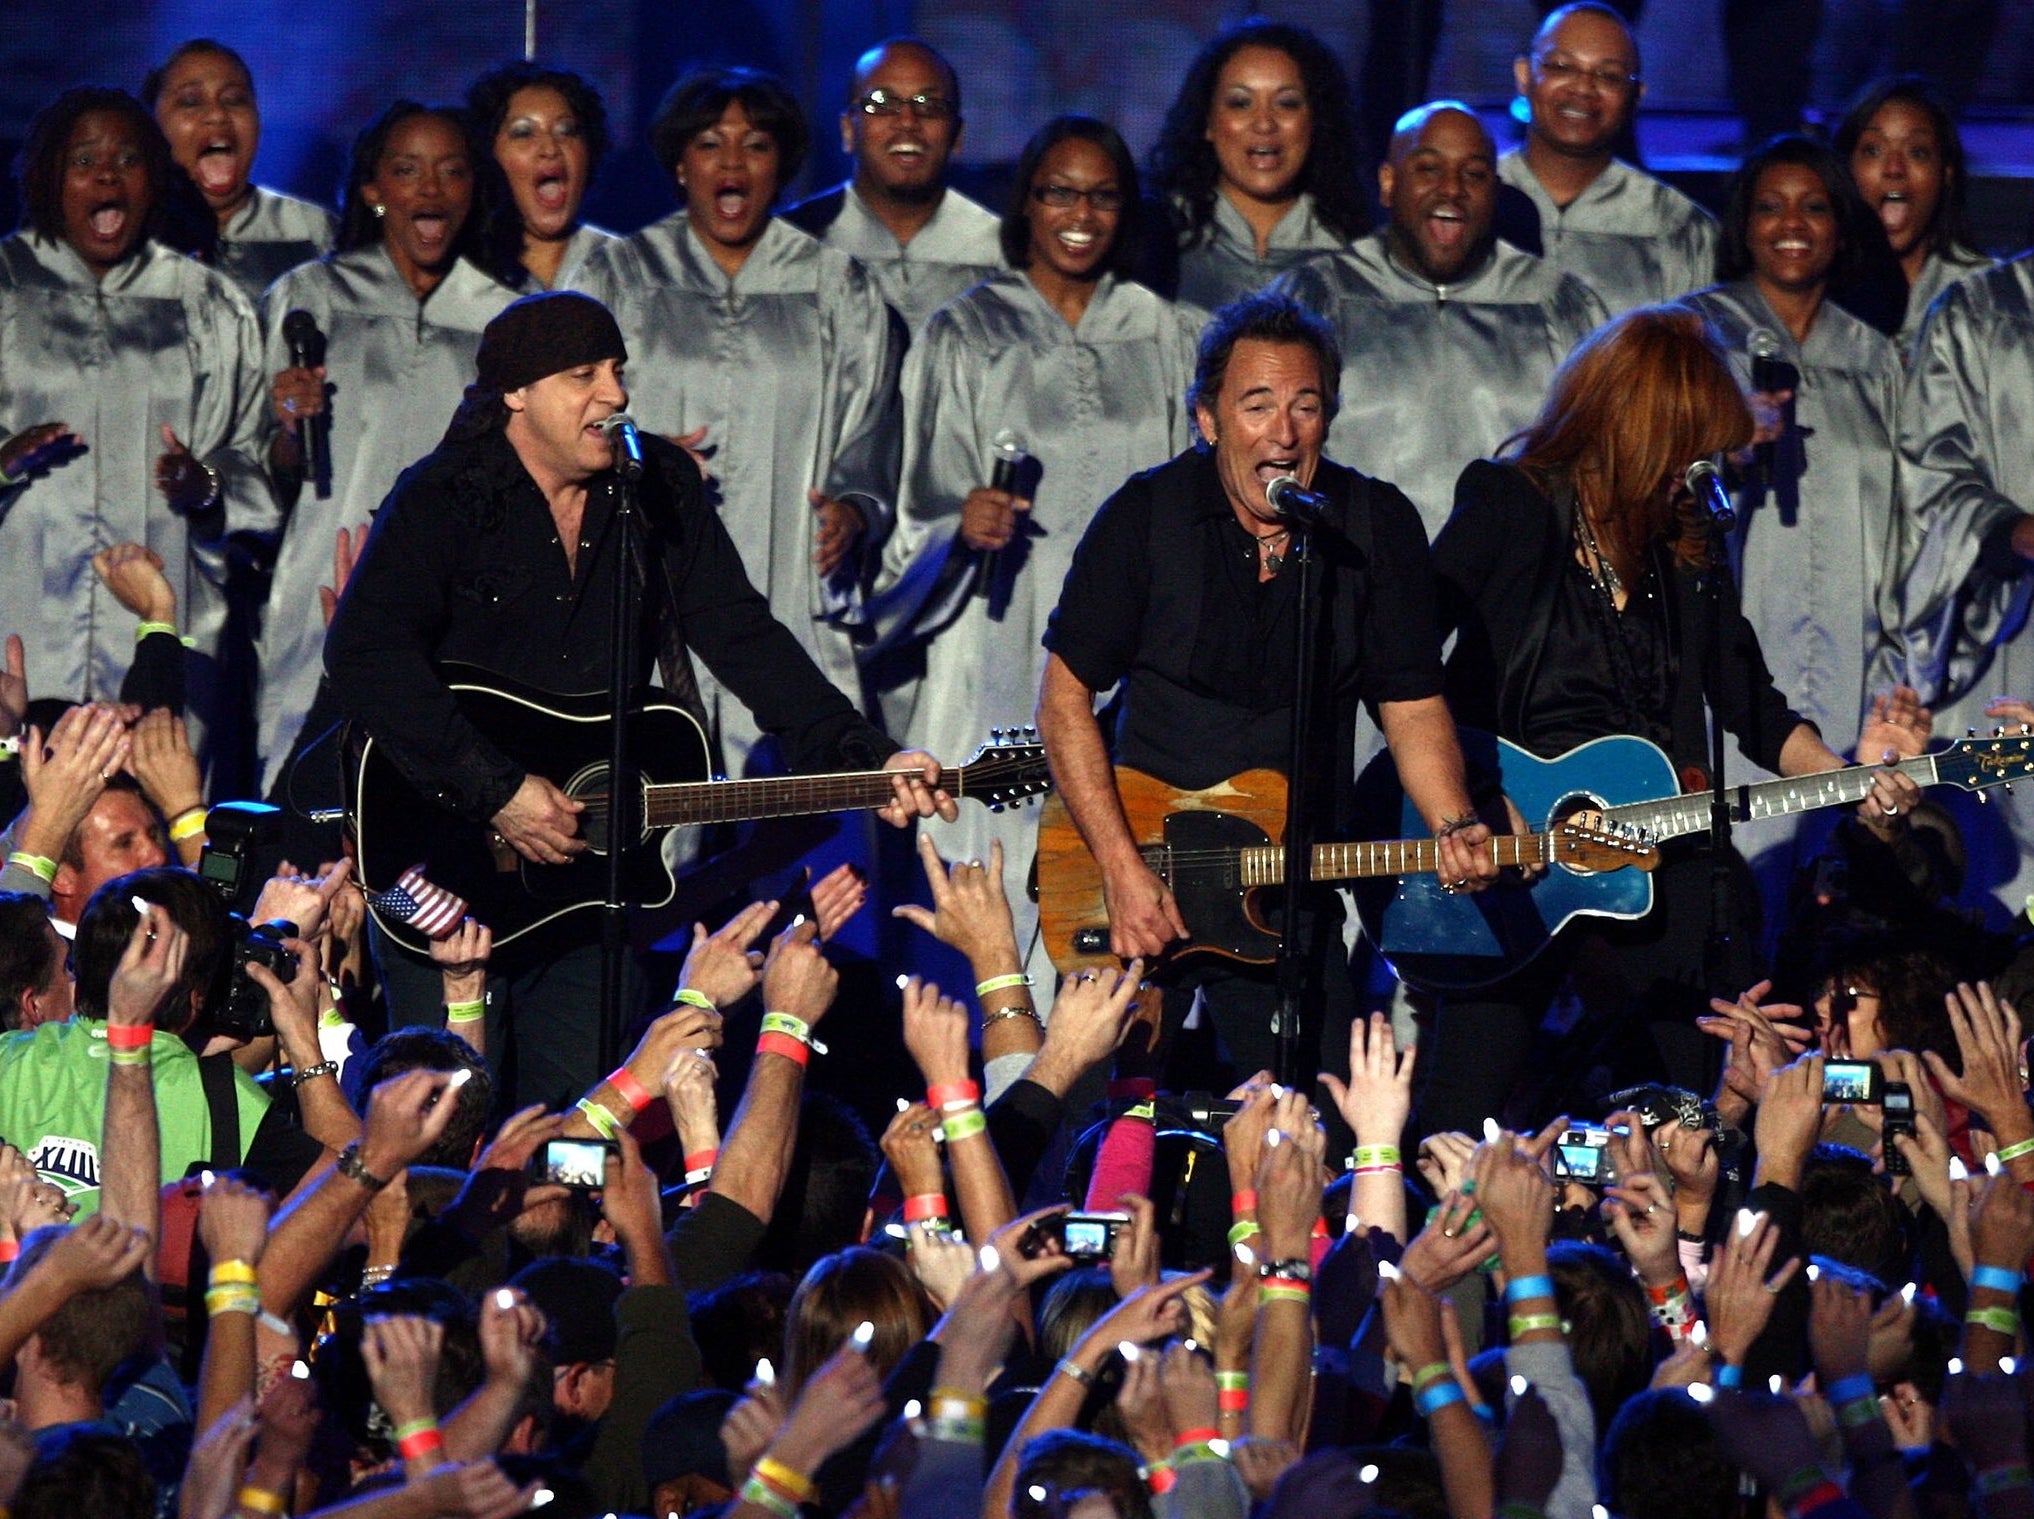 Bruce Springsteen and the E Street Band perform at the Bridgestone Halftime Show during Super Bowl XLIII